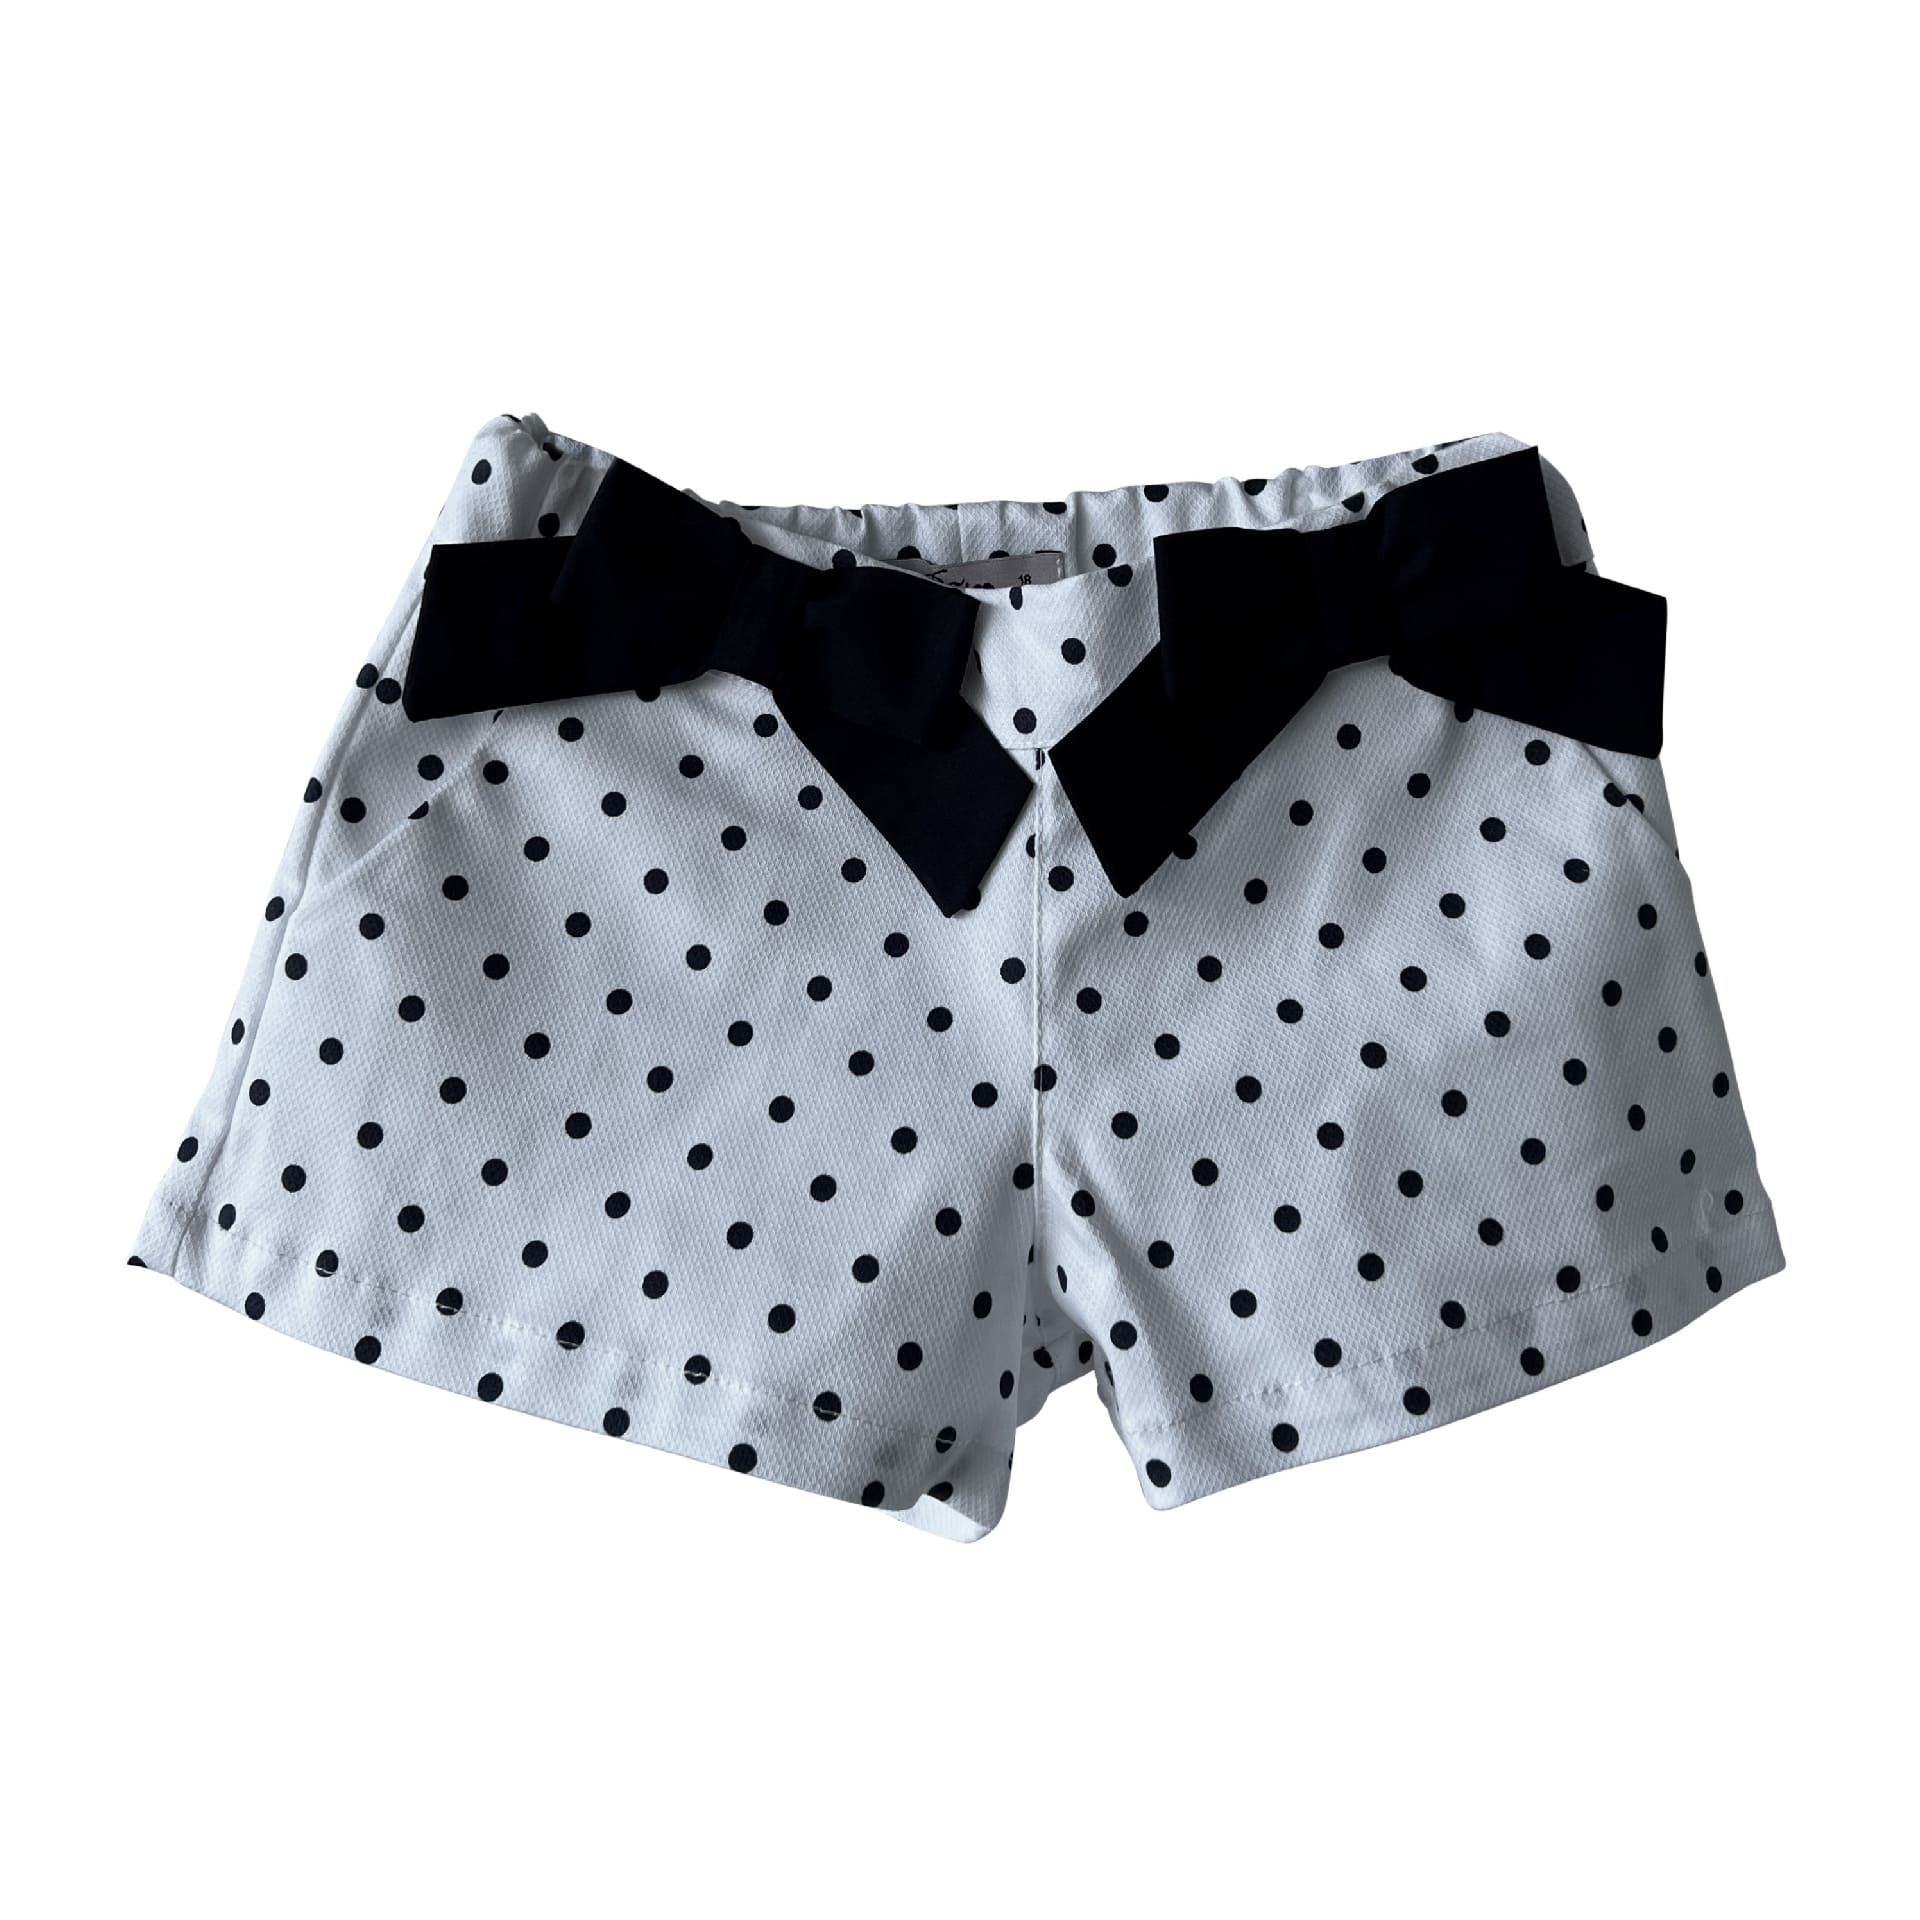 Ivory with navy dots shorts